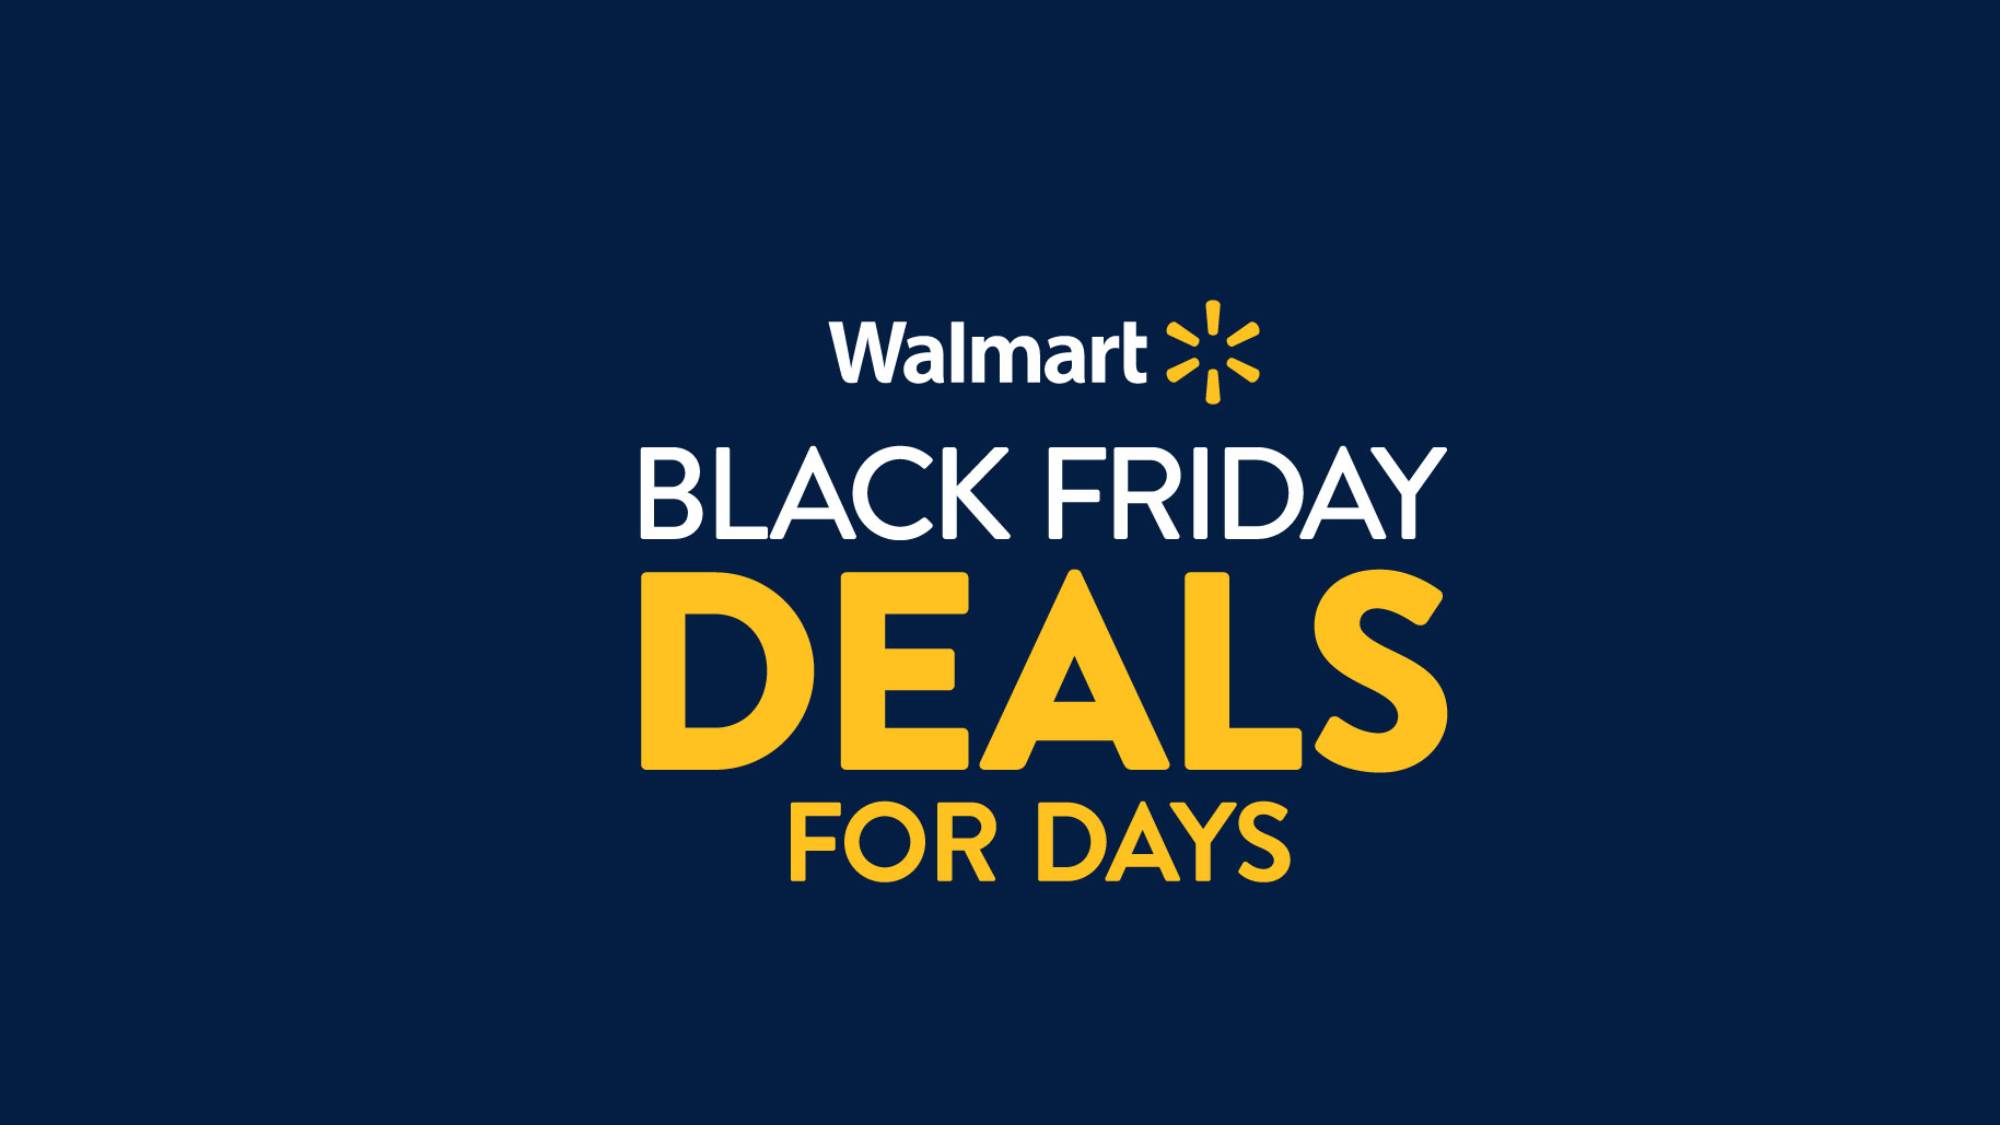 Walmart Black Friday Deals for Days event starts Nov. 7 — what to